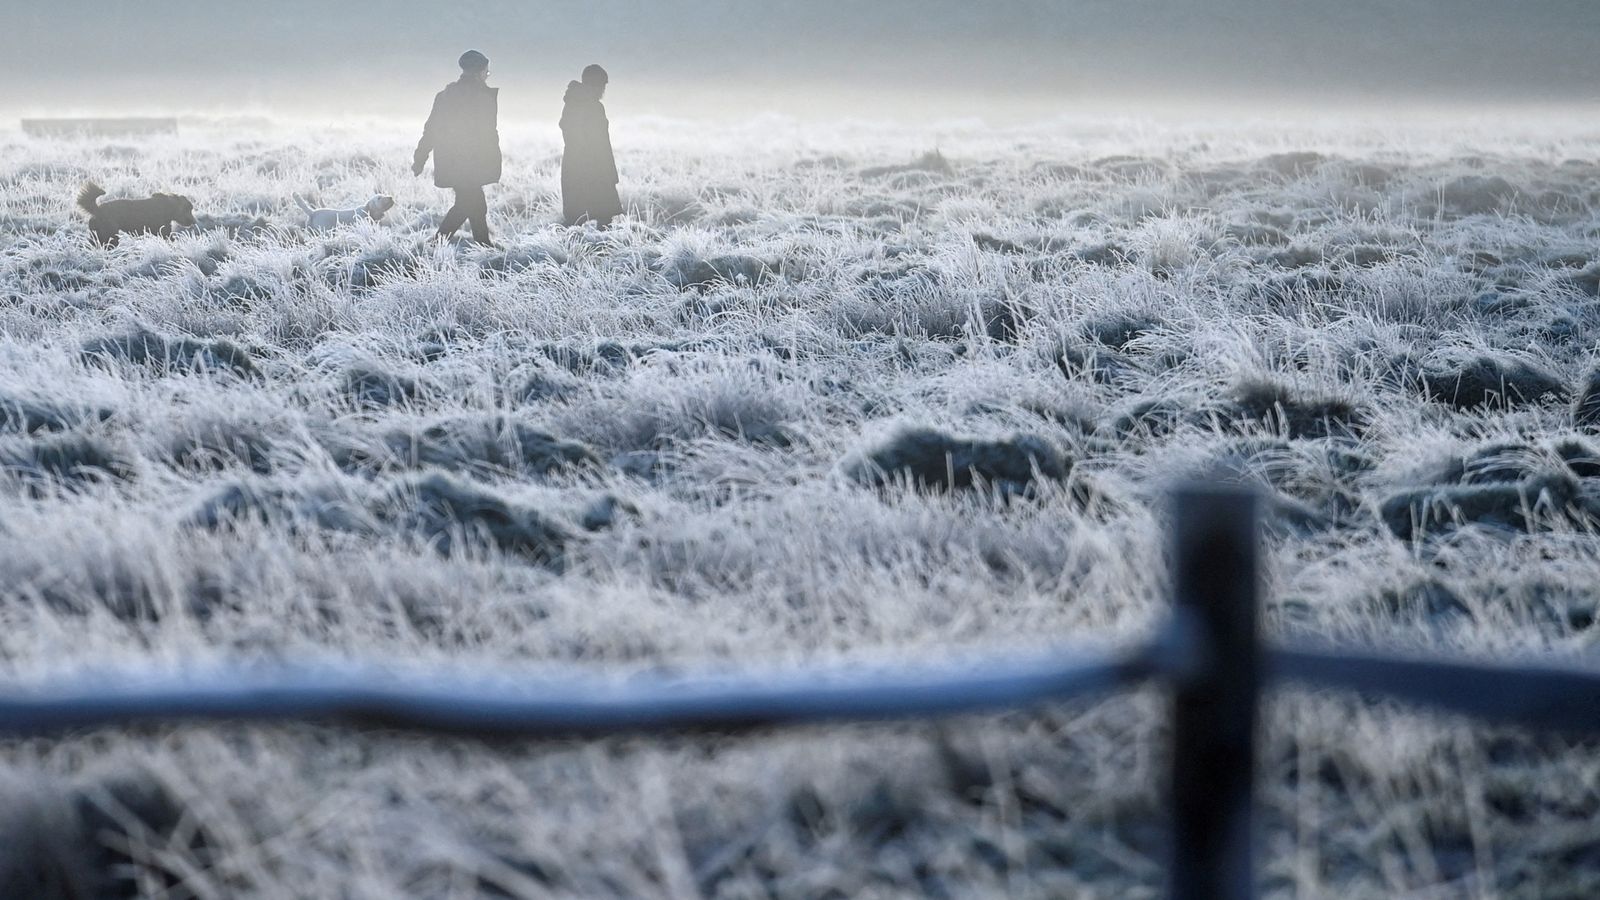 UK weather: Freezing fog warning across much of England - as conditions trigger air pollution alert for London